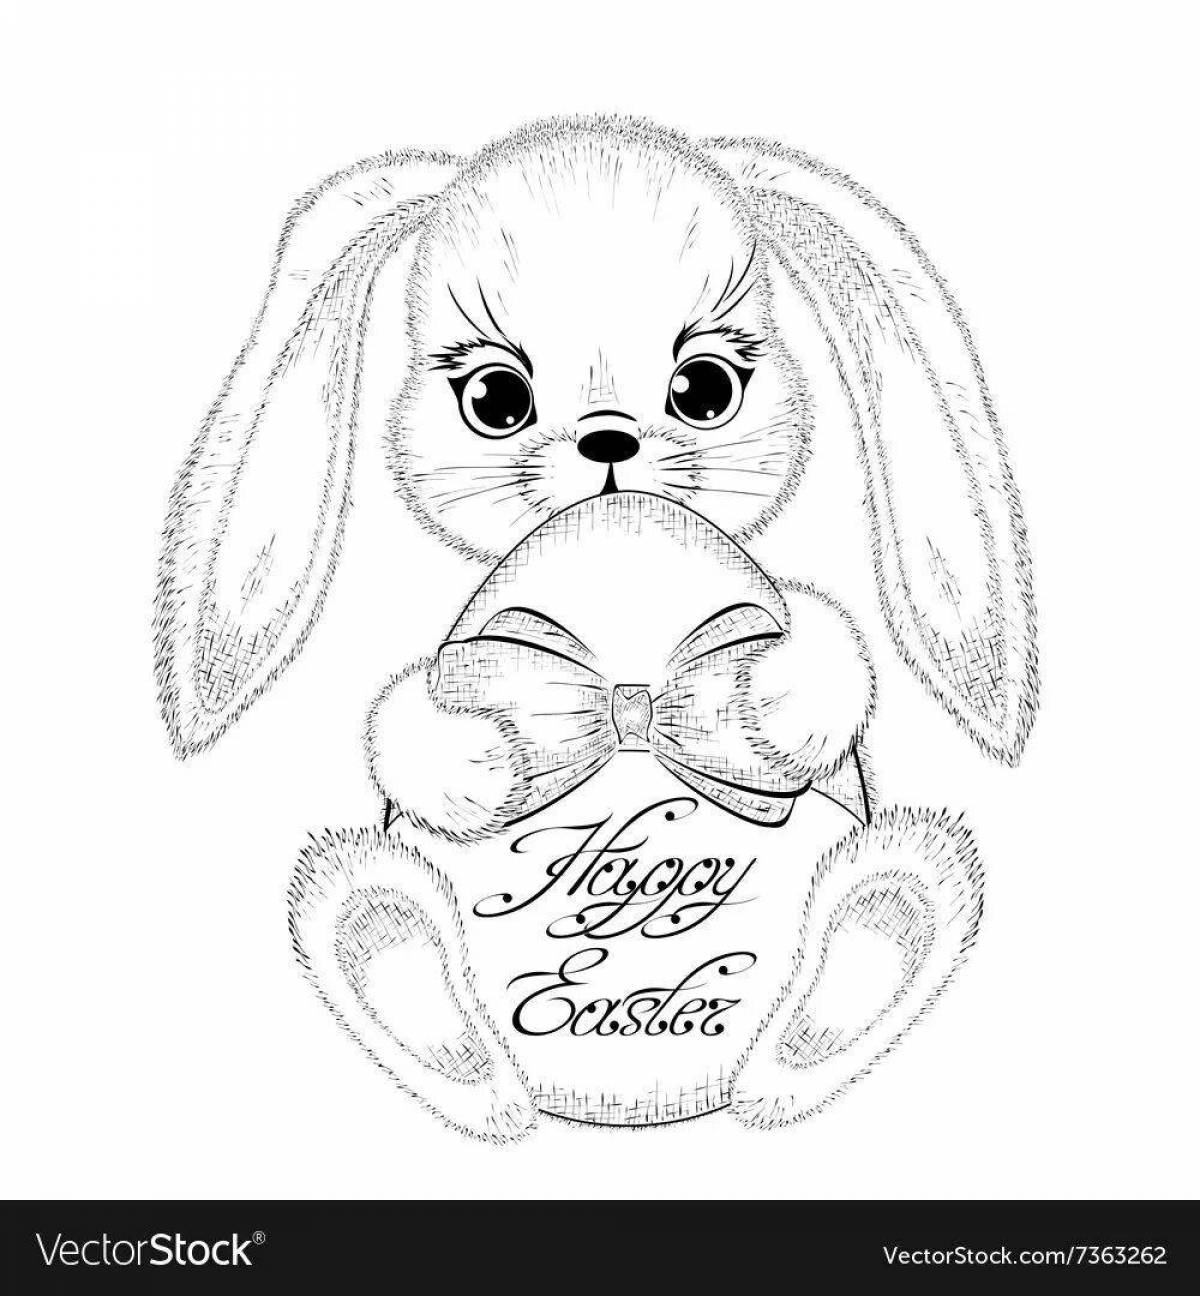 Wiggly coloring page bunny in the hat